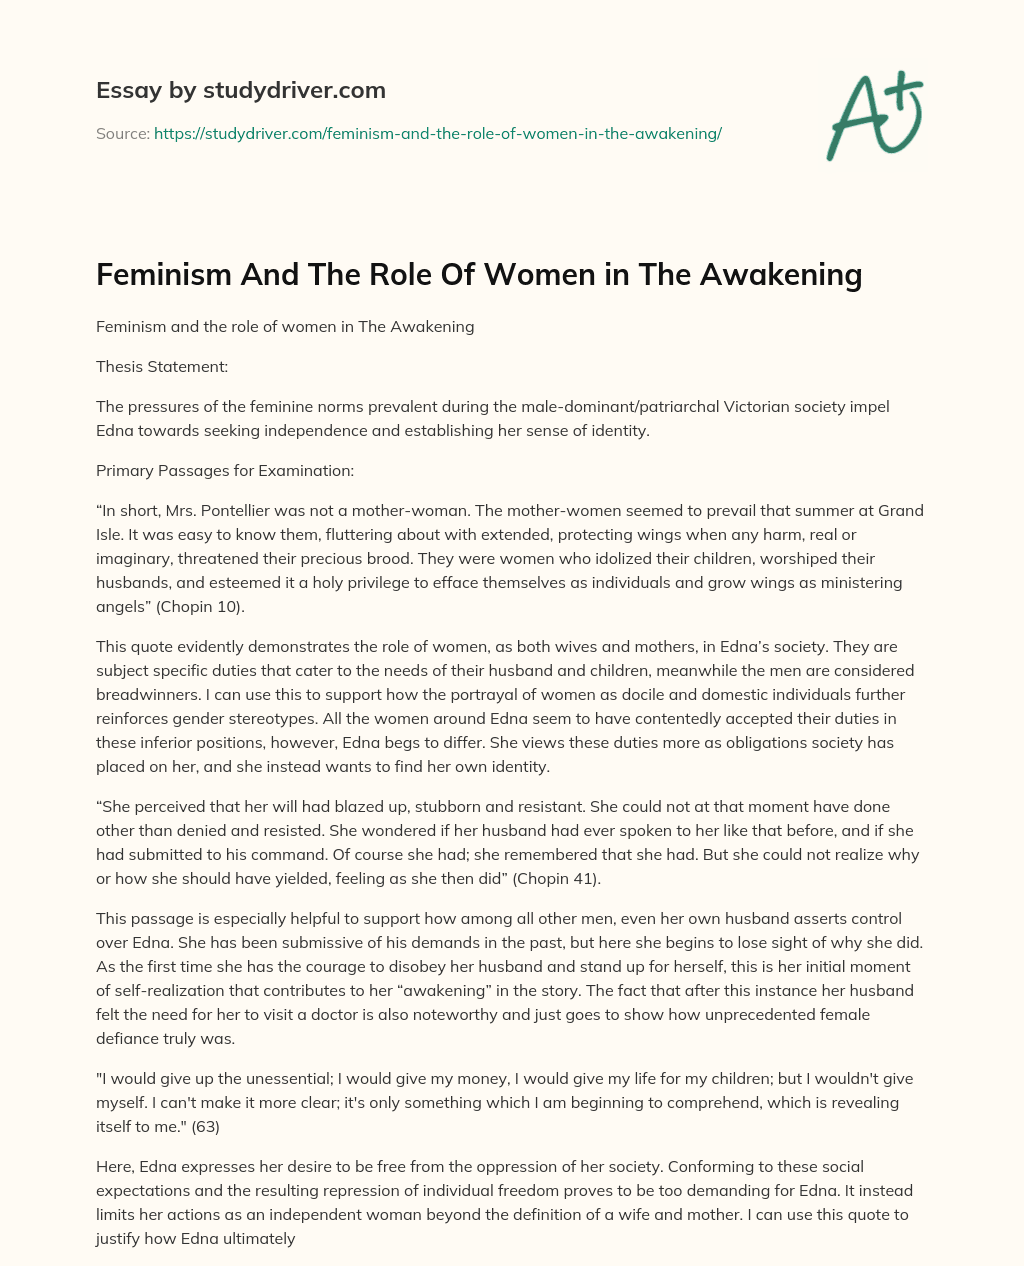 Feminism and the Role of Women in the Awakening essay